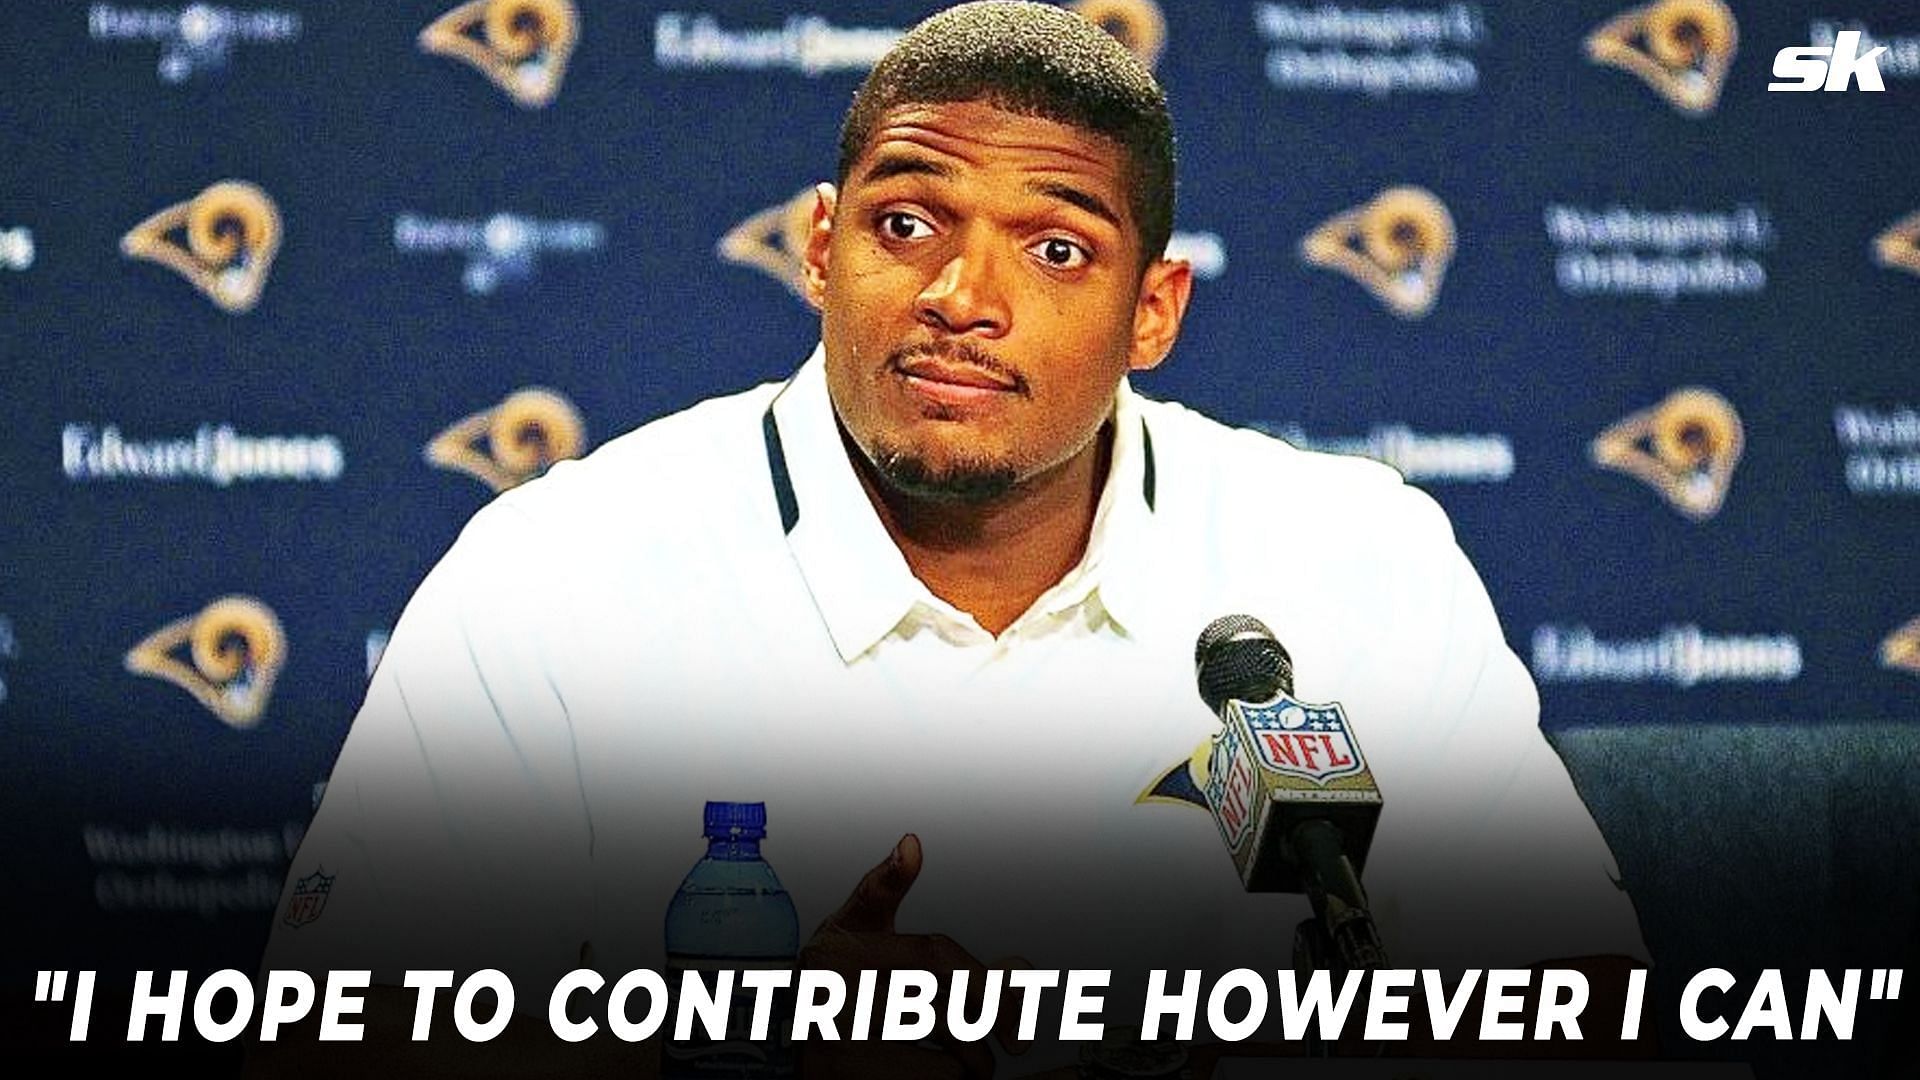 Michael Sam, the first openly gay player in the NFL, is now a coach with the Barcelona Dragons